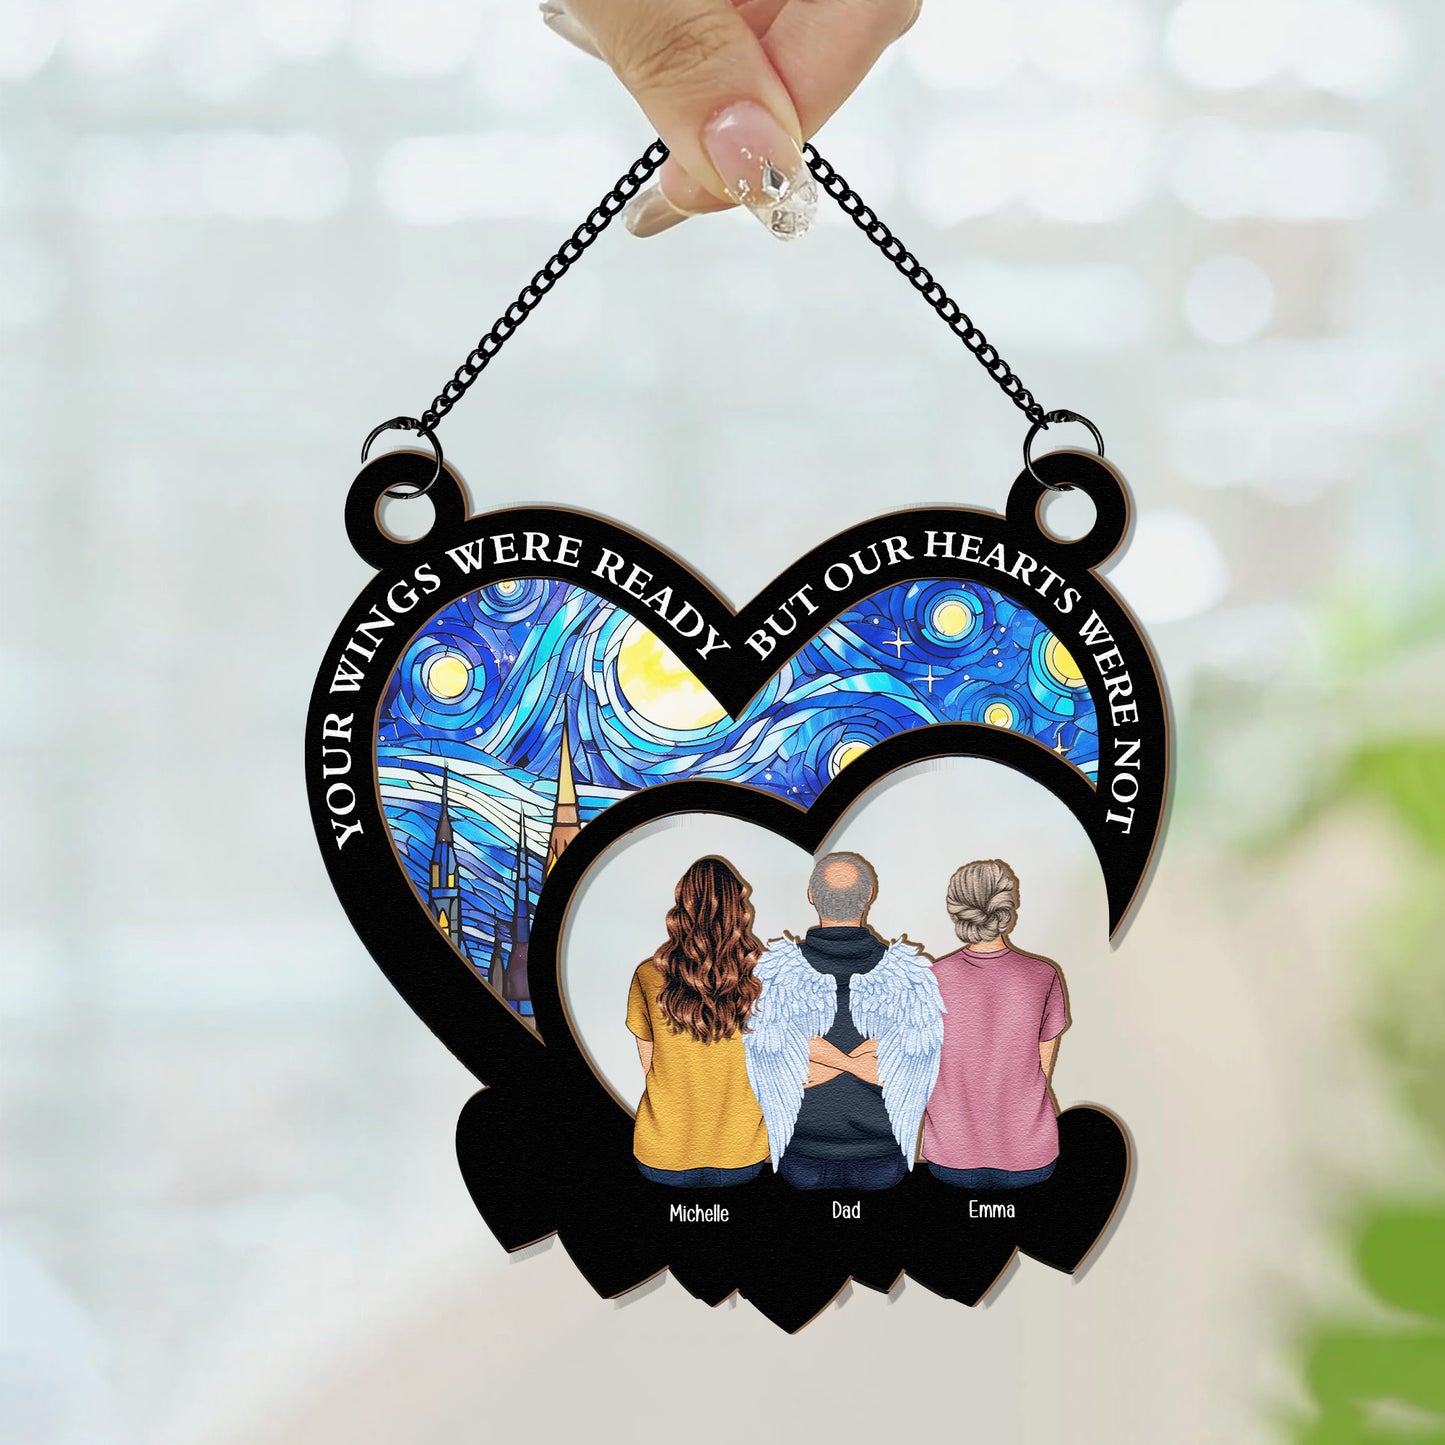 Your Wings Were Ready - Personalized Window Hanging Suncatcher Ornament